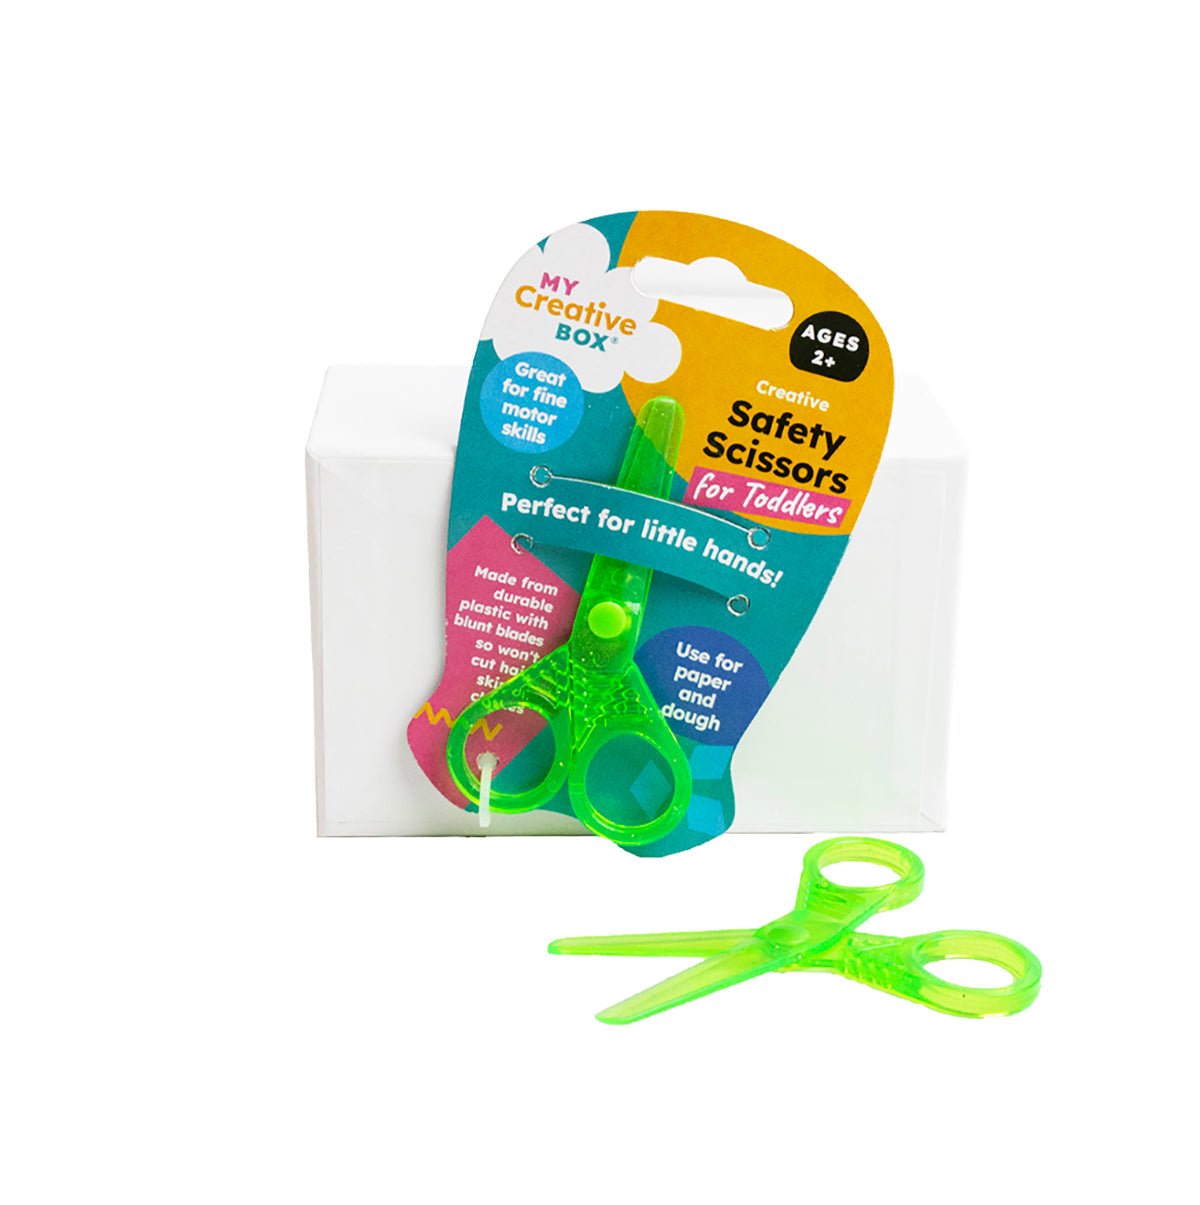 Creative Safety Scissors for Toddlers | My Creative Box